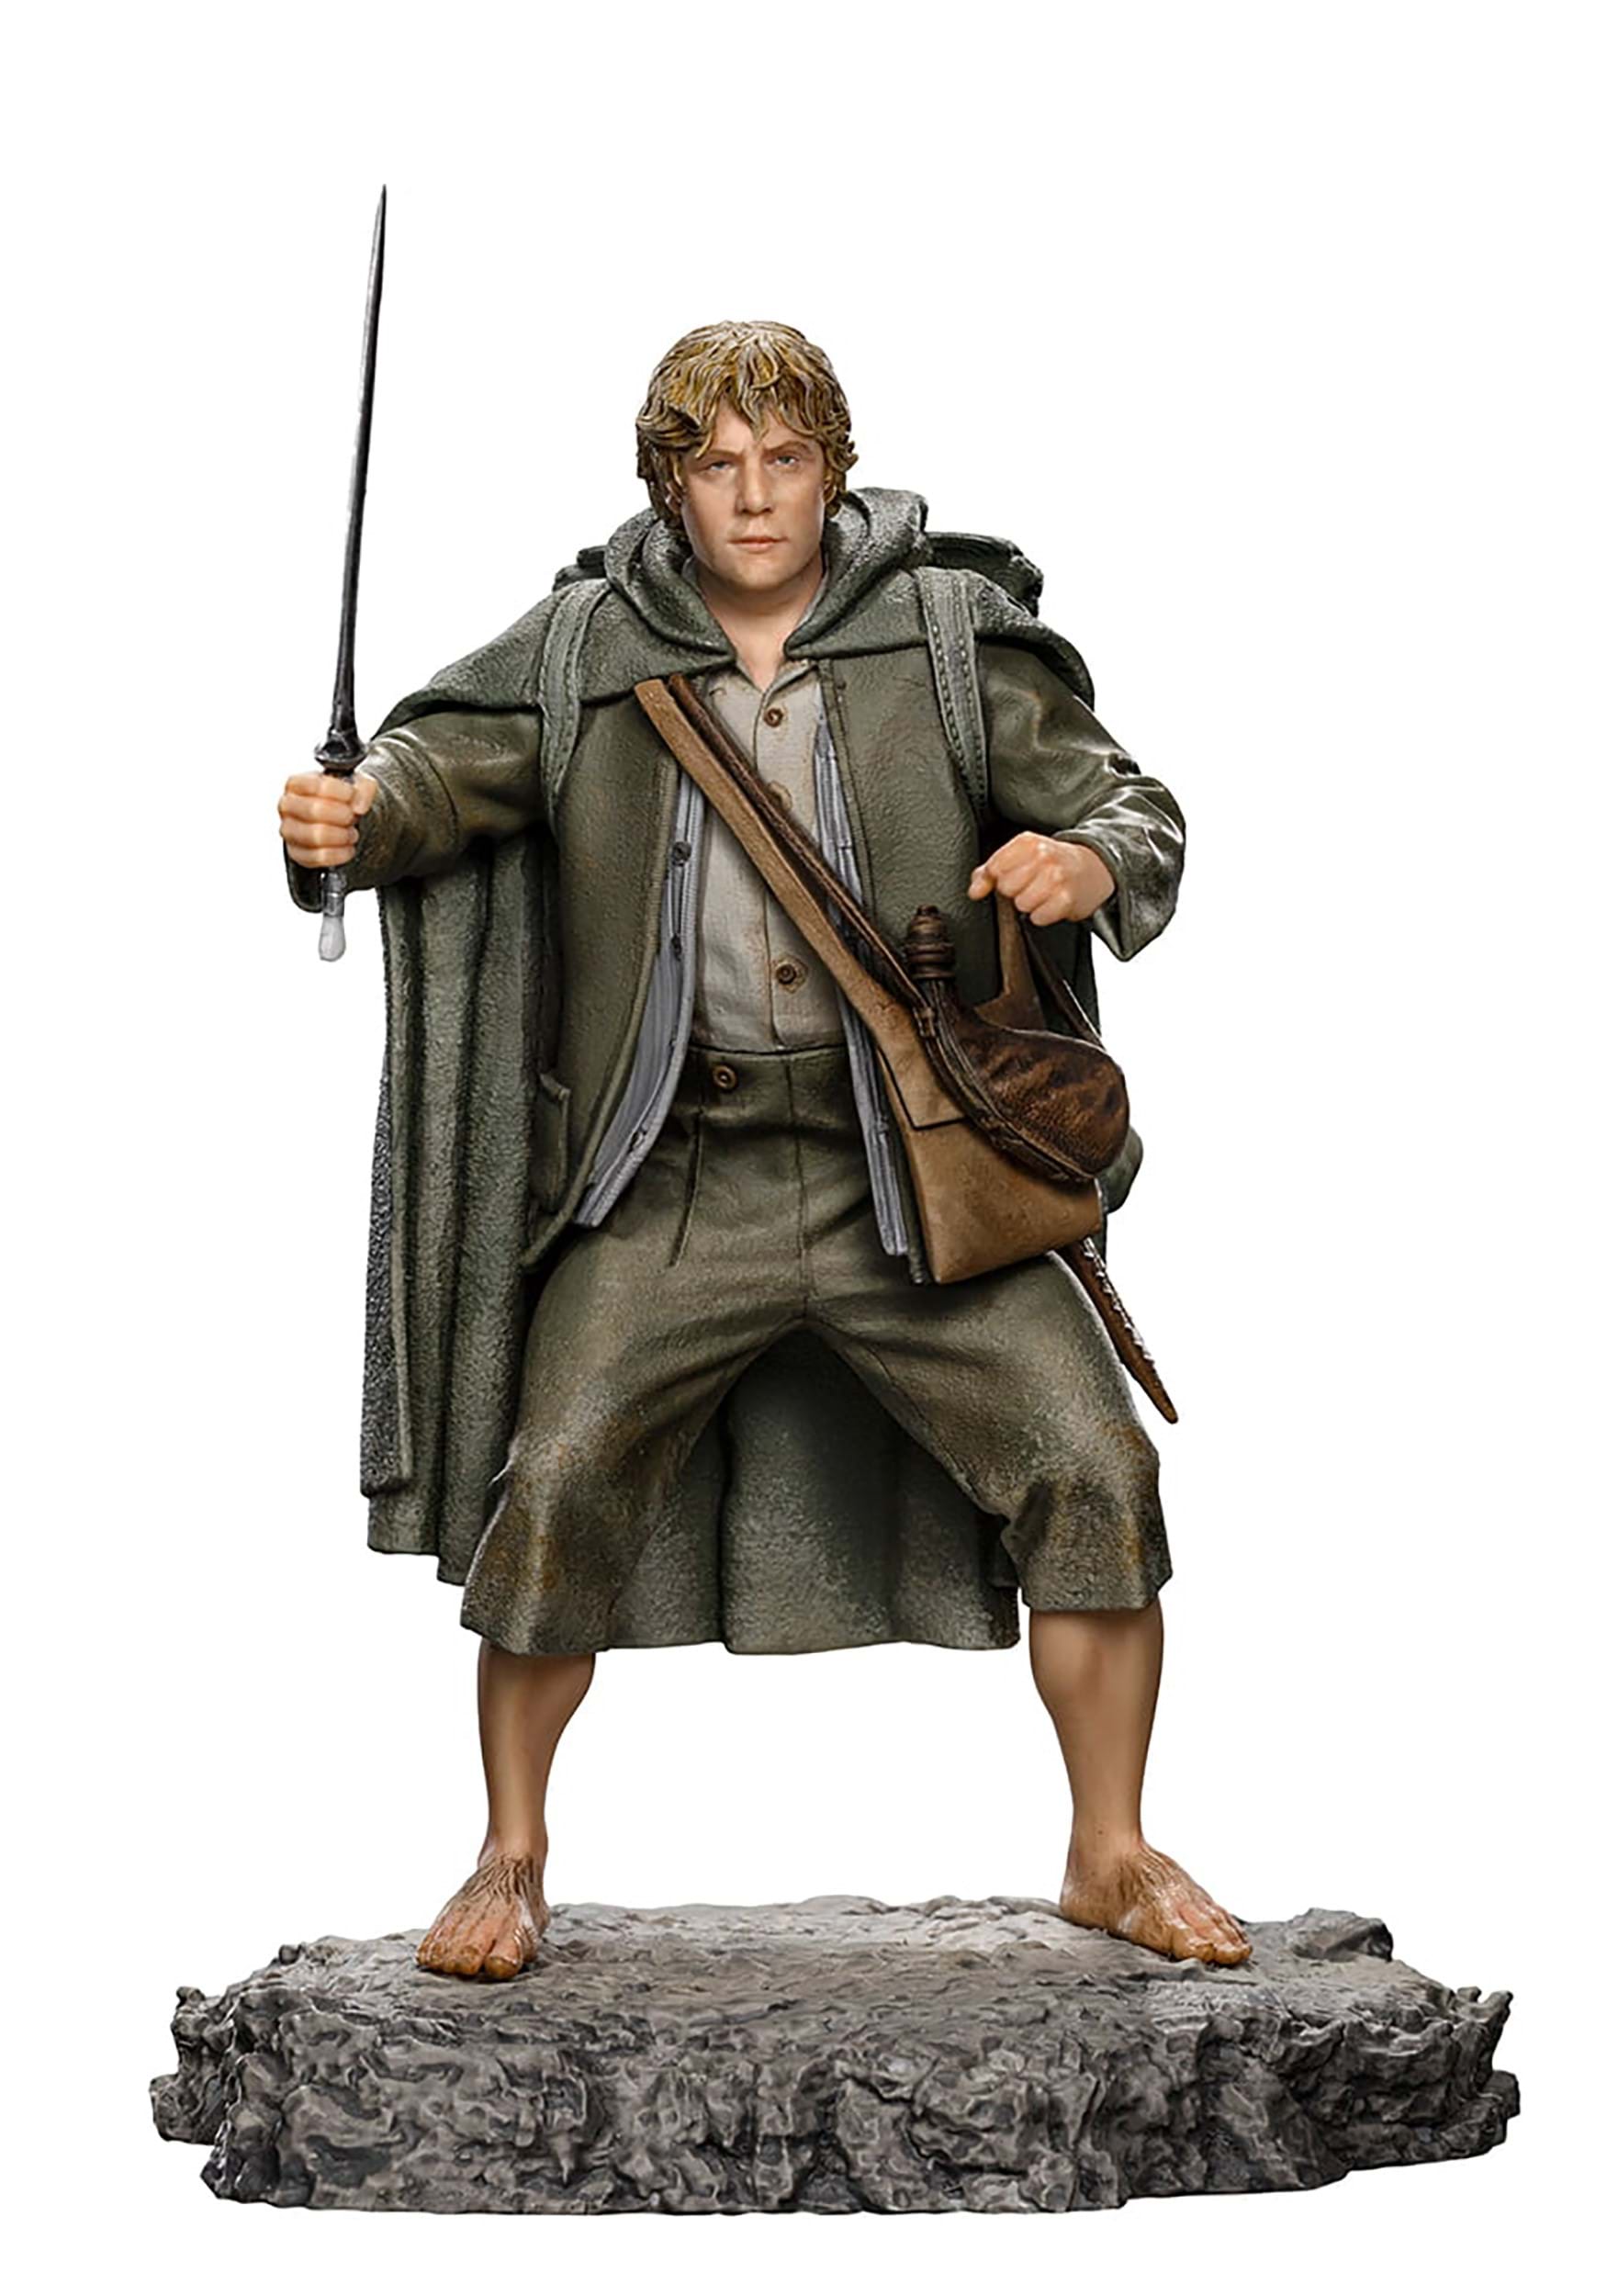 Image of Iron Studios Sam Lord of the Rings Statue